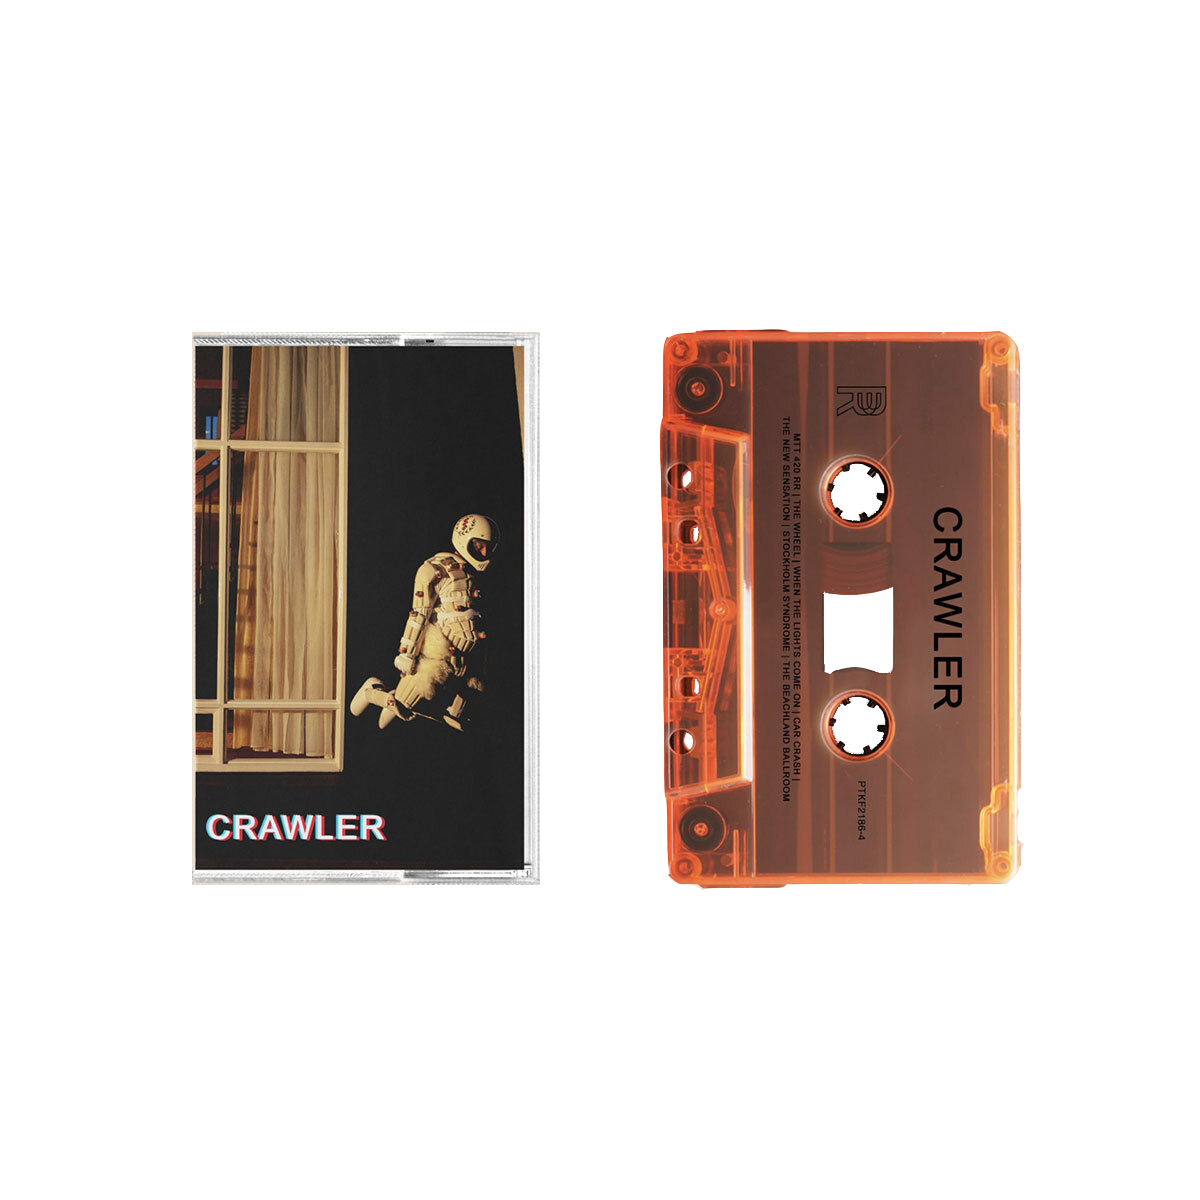 IDLES - Crawler Cassette (Limited Edition)